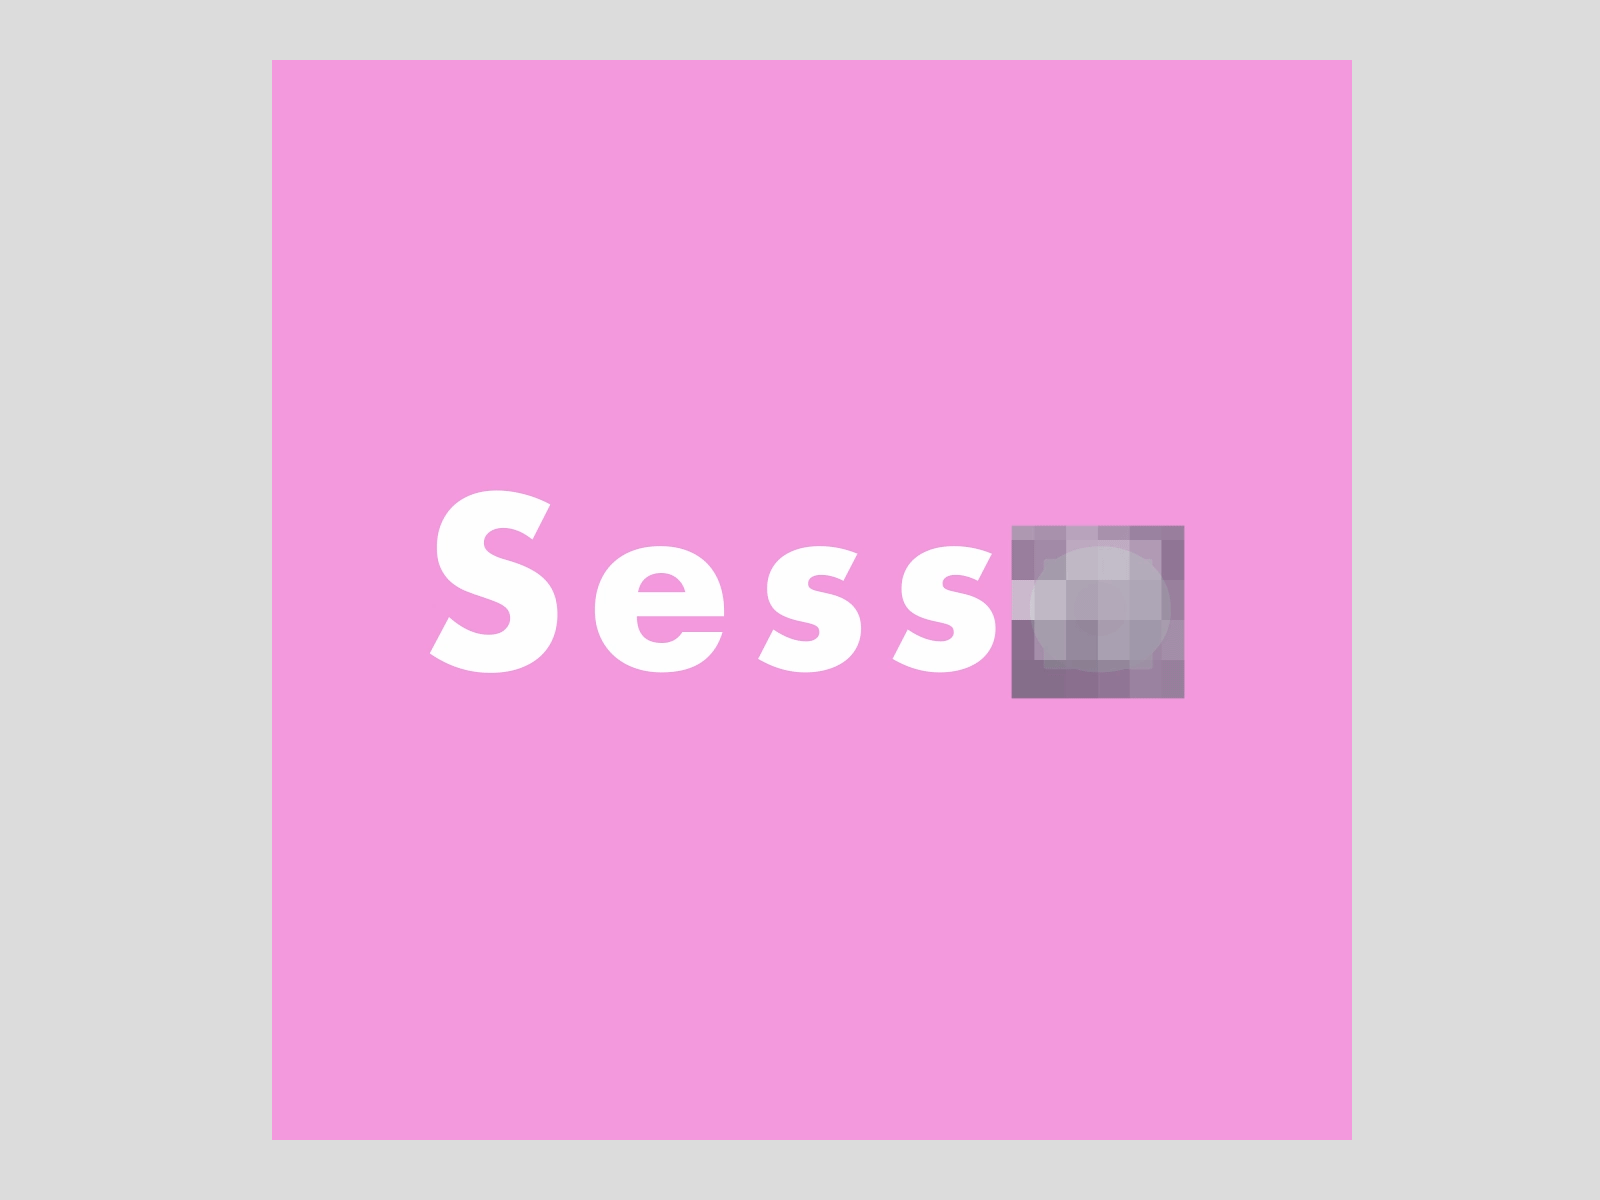 SESSO gif by Patricien on Dribbble